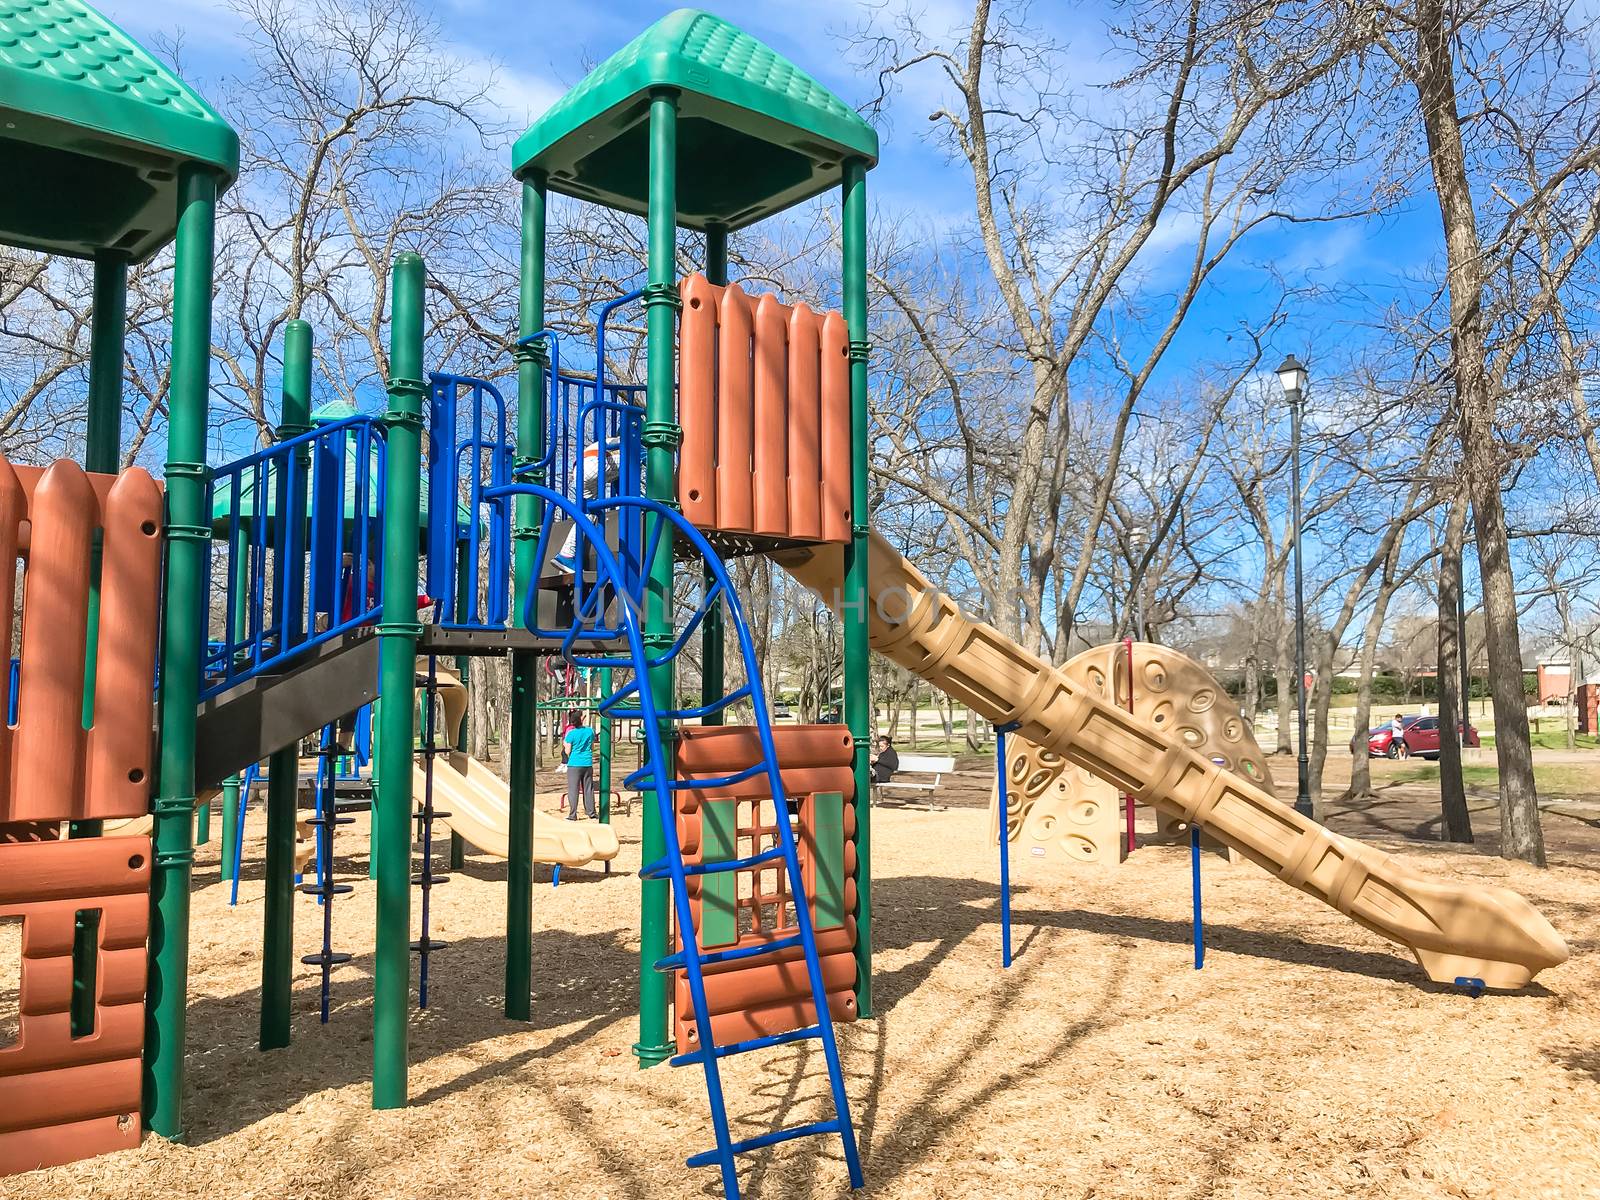 Kids running at colorful playground during wintertime in Lewisville, Texas, USA.